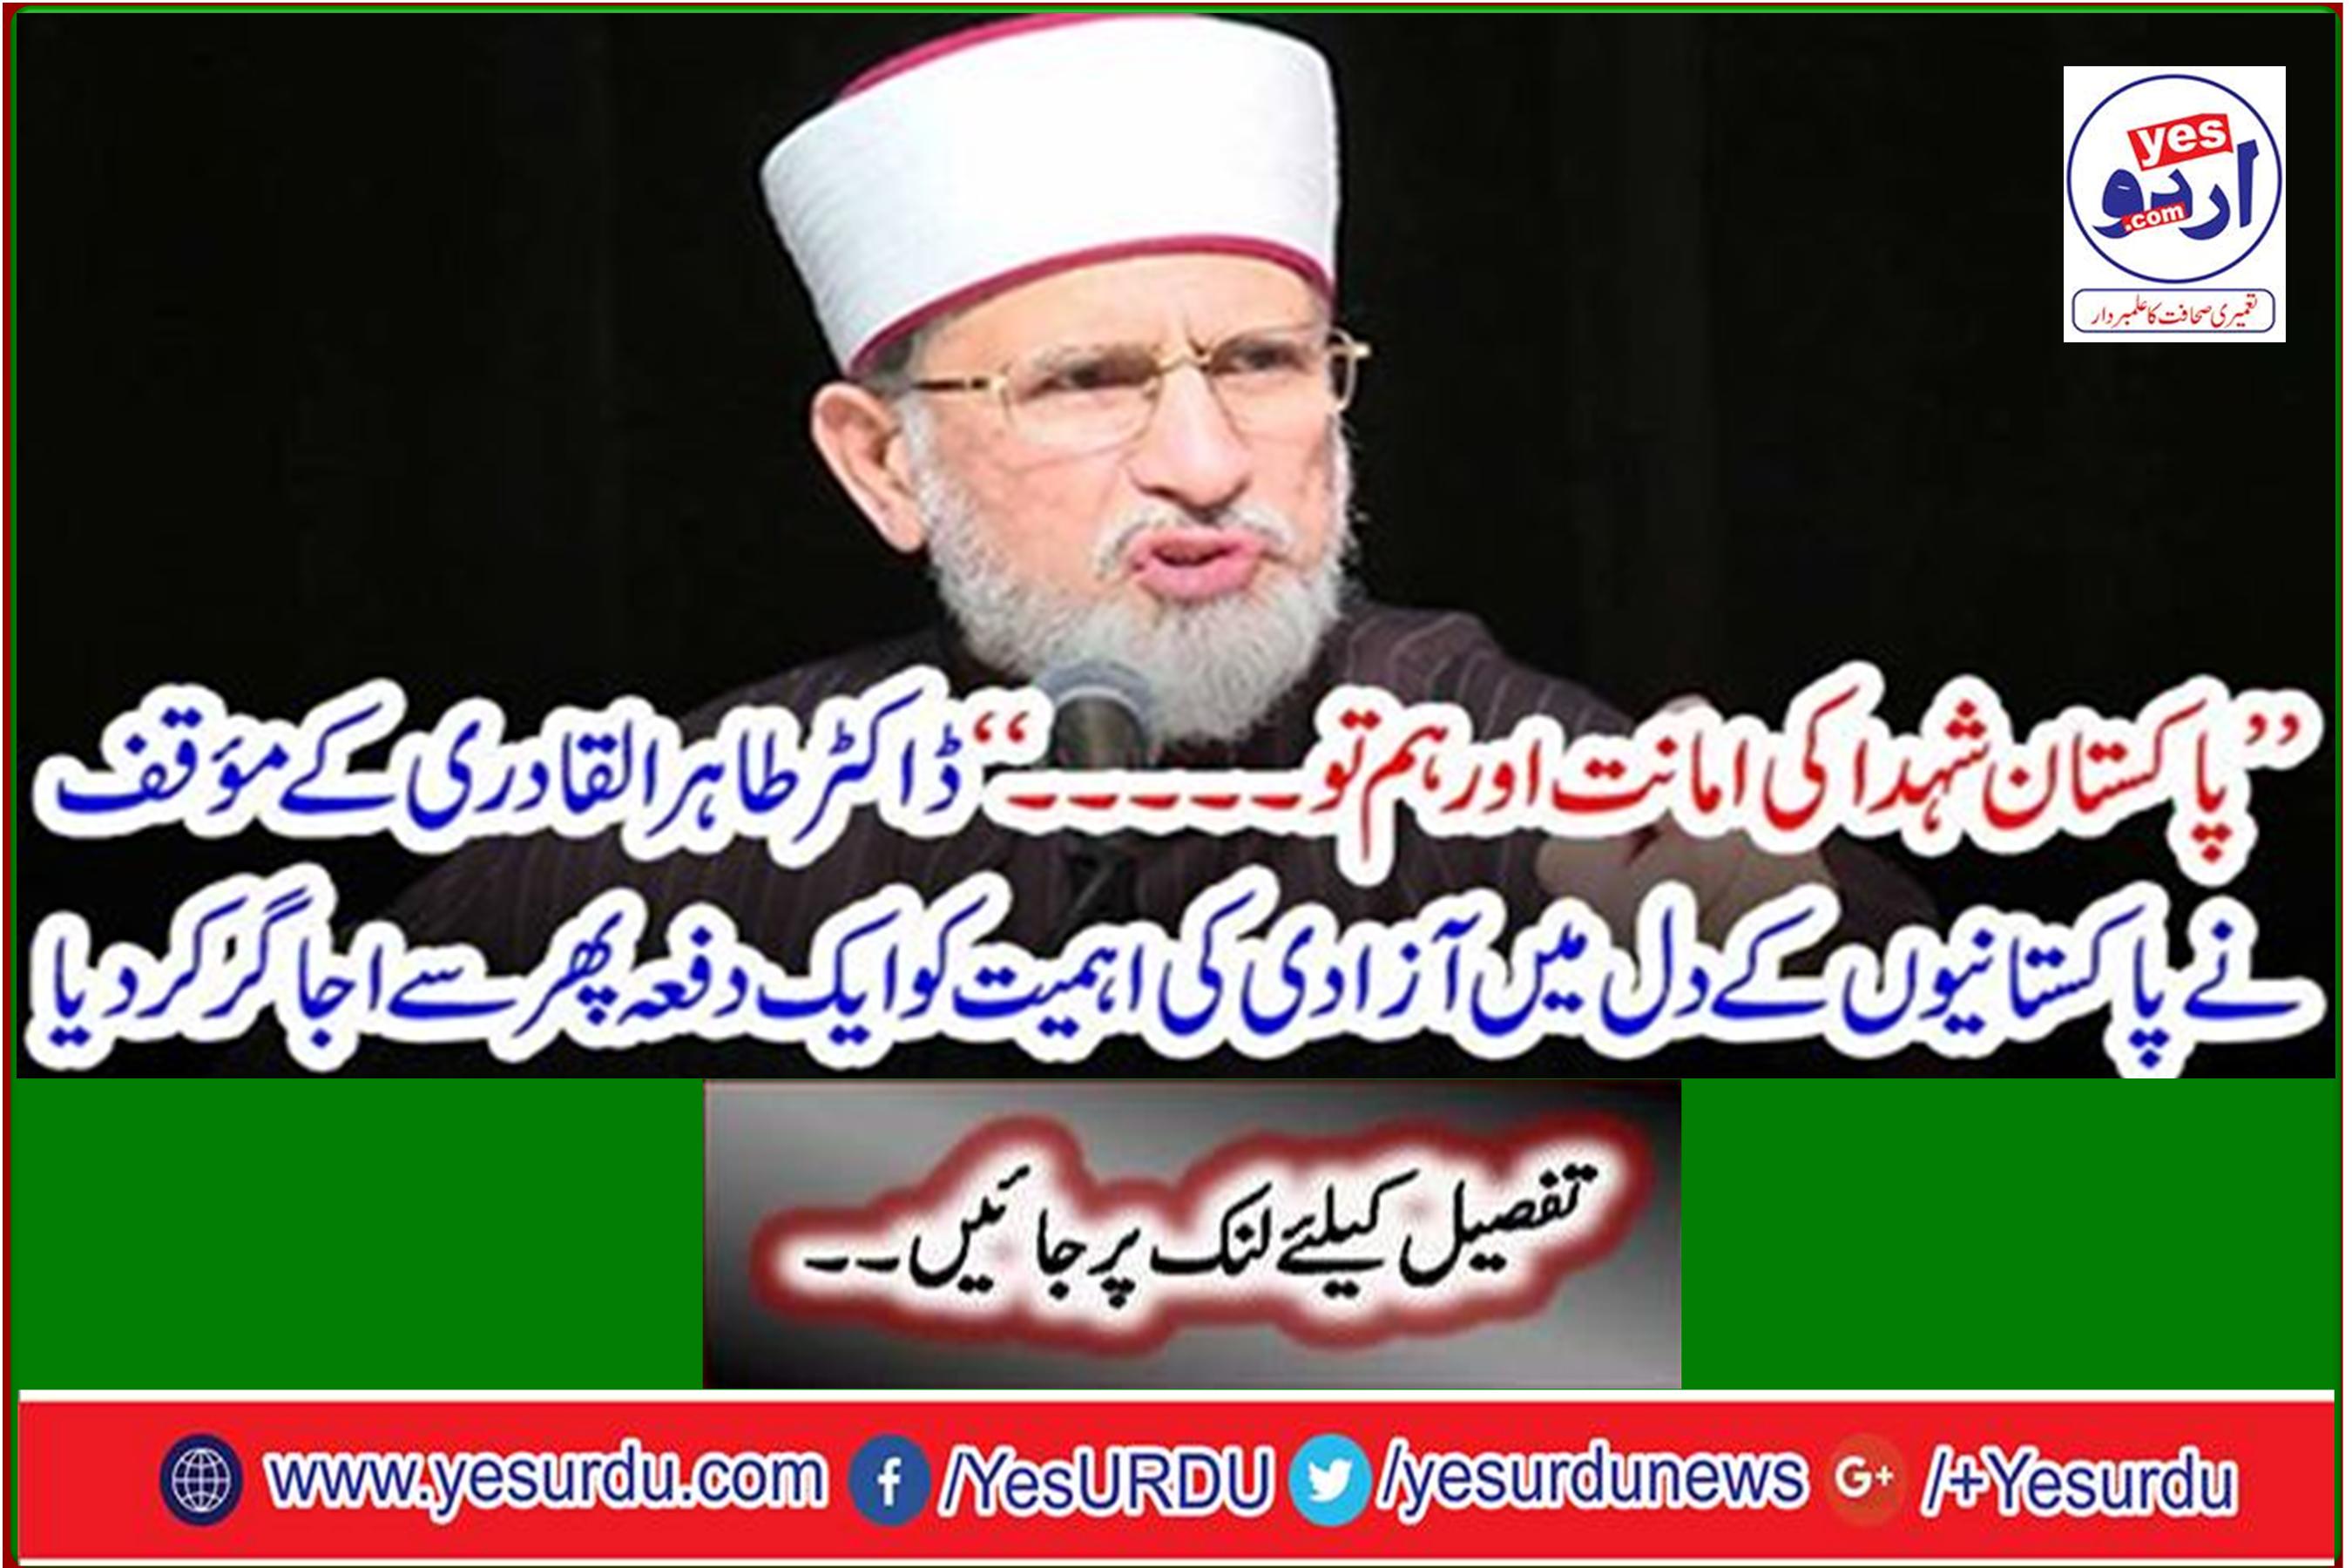 Dr Tahir-ul-Qadri's position once again highlights the importance of independence in Pakistanis' hearts